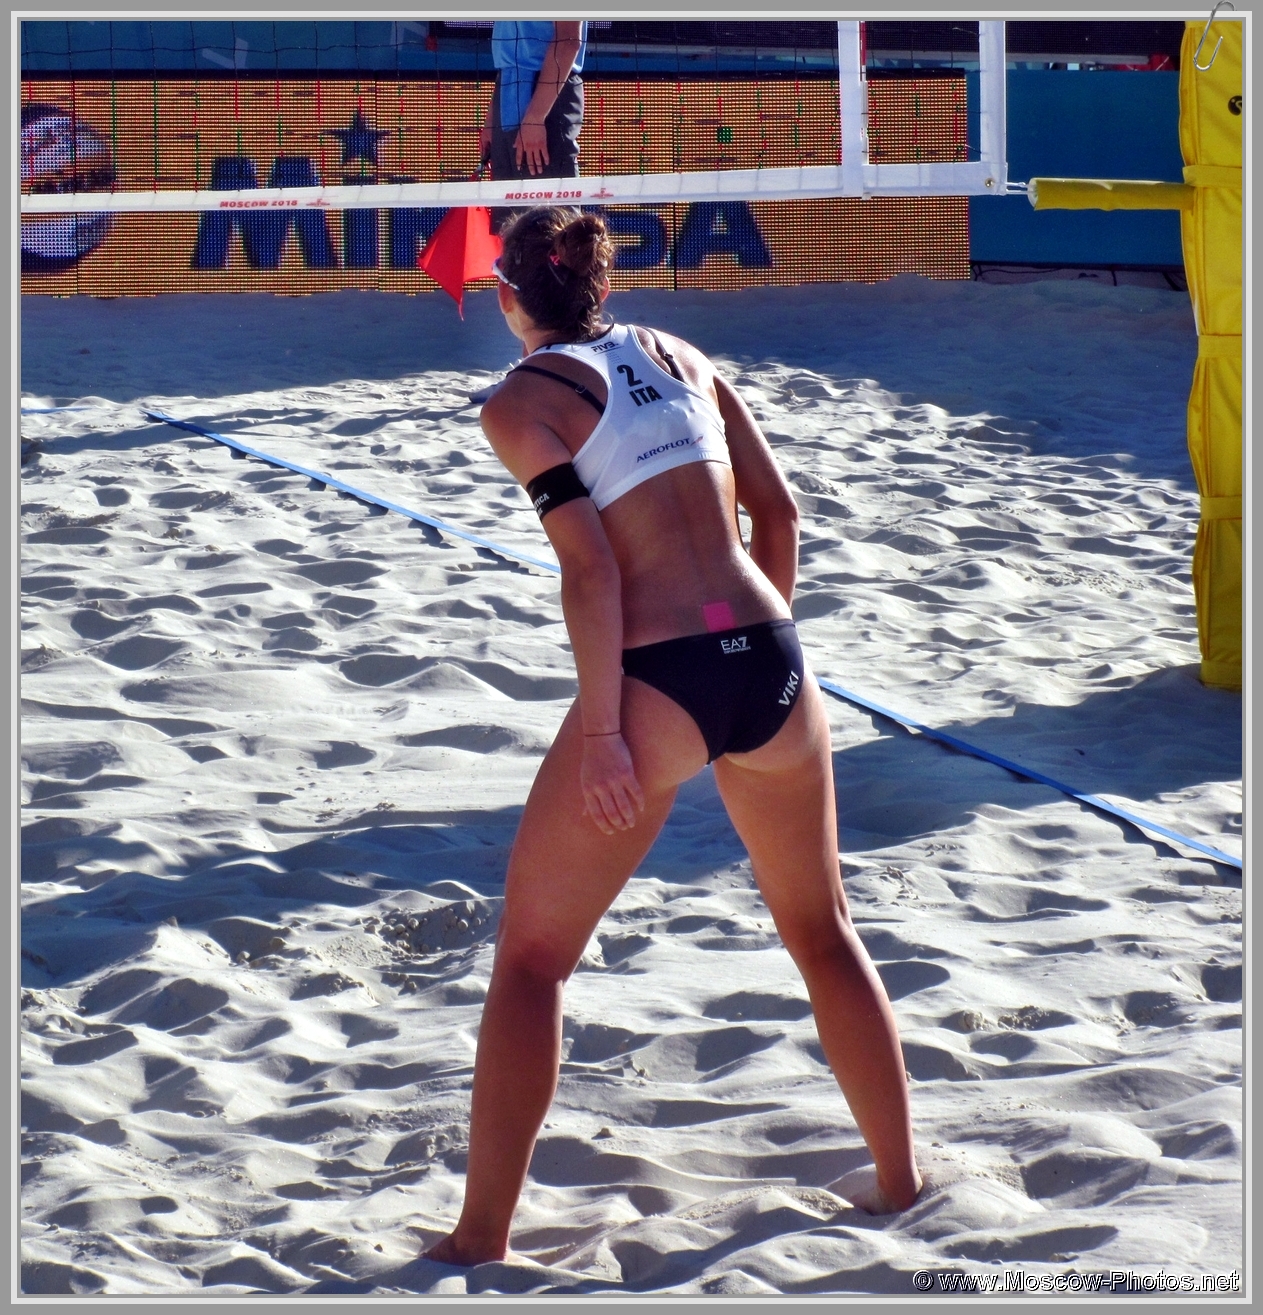  Viktoria Orsi Toth at FIVB Beach Volleyball World Tour in Moscow 2018